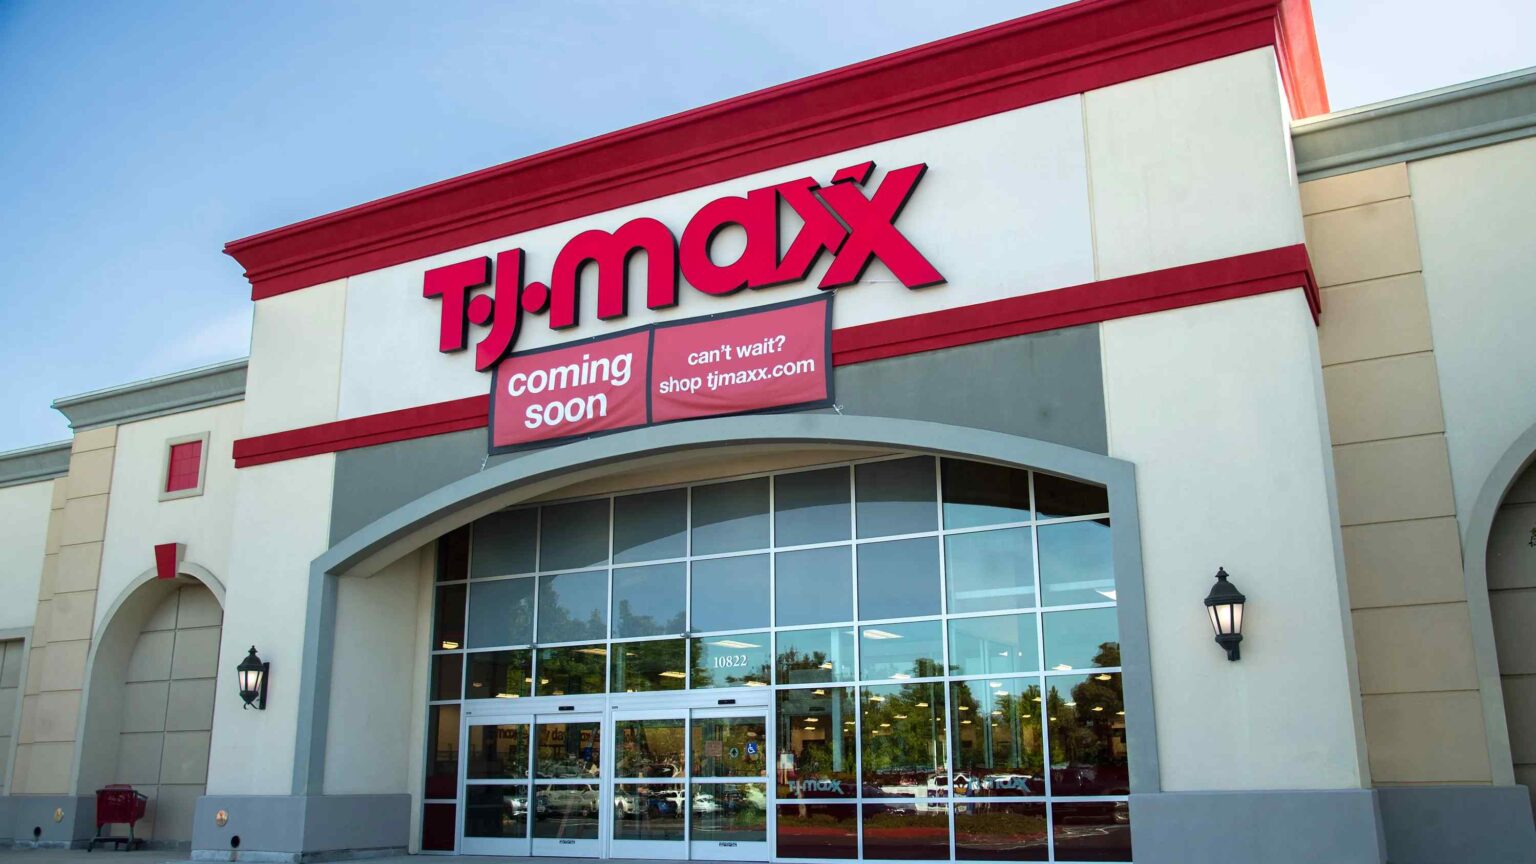 Plan Your TJ Maxx Shopping Trip with These Open and Closing Hours